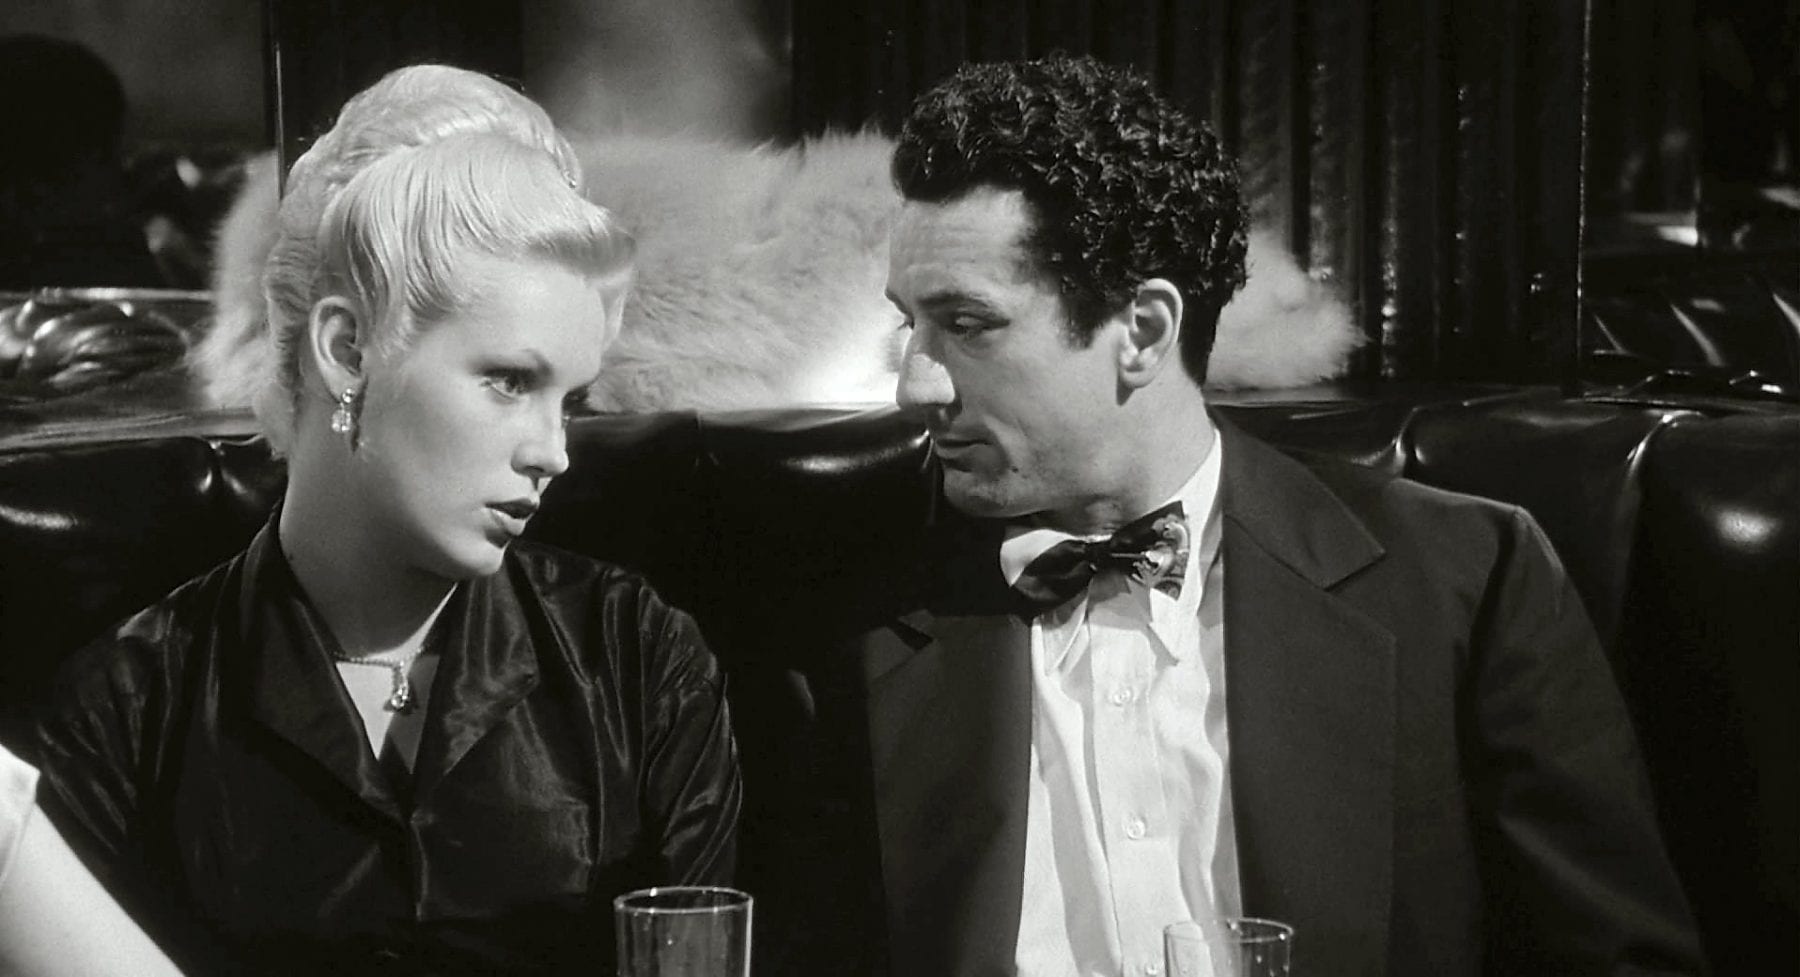 Robert De Niro and Cathy Moriarty enjoy a rare moment of civility in Raging Bull